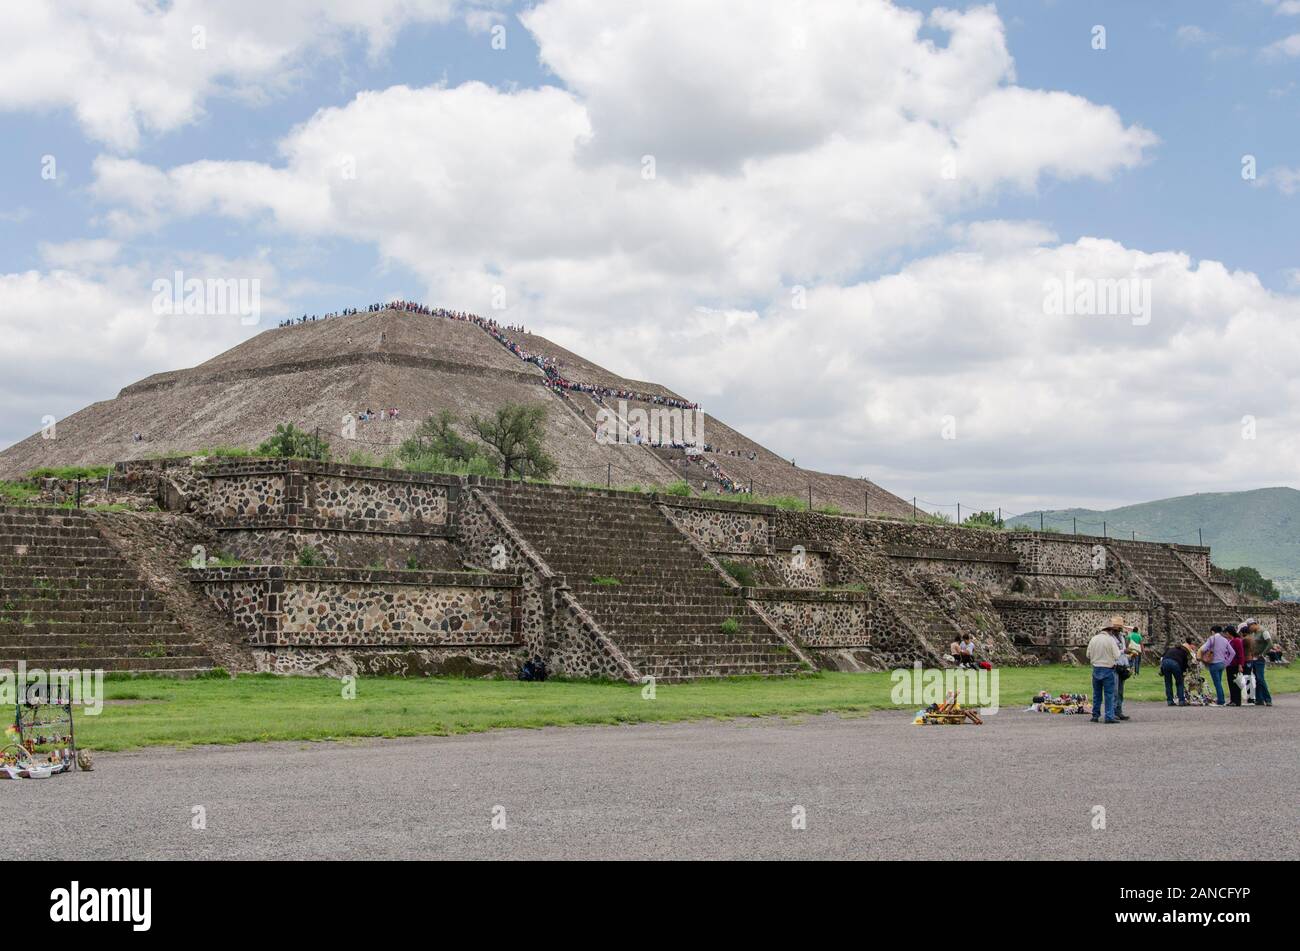 Pyramid of the Sun in Teotihuacan, an ancient Mesoamerican city located in a sub-valley of the Valley of Mexico Stock Photo